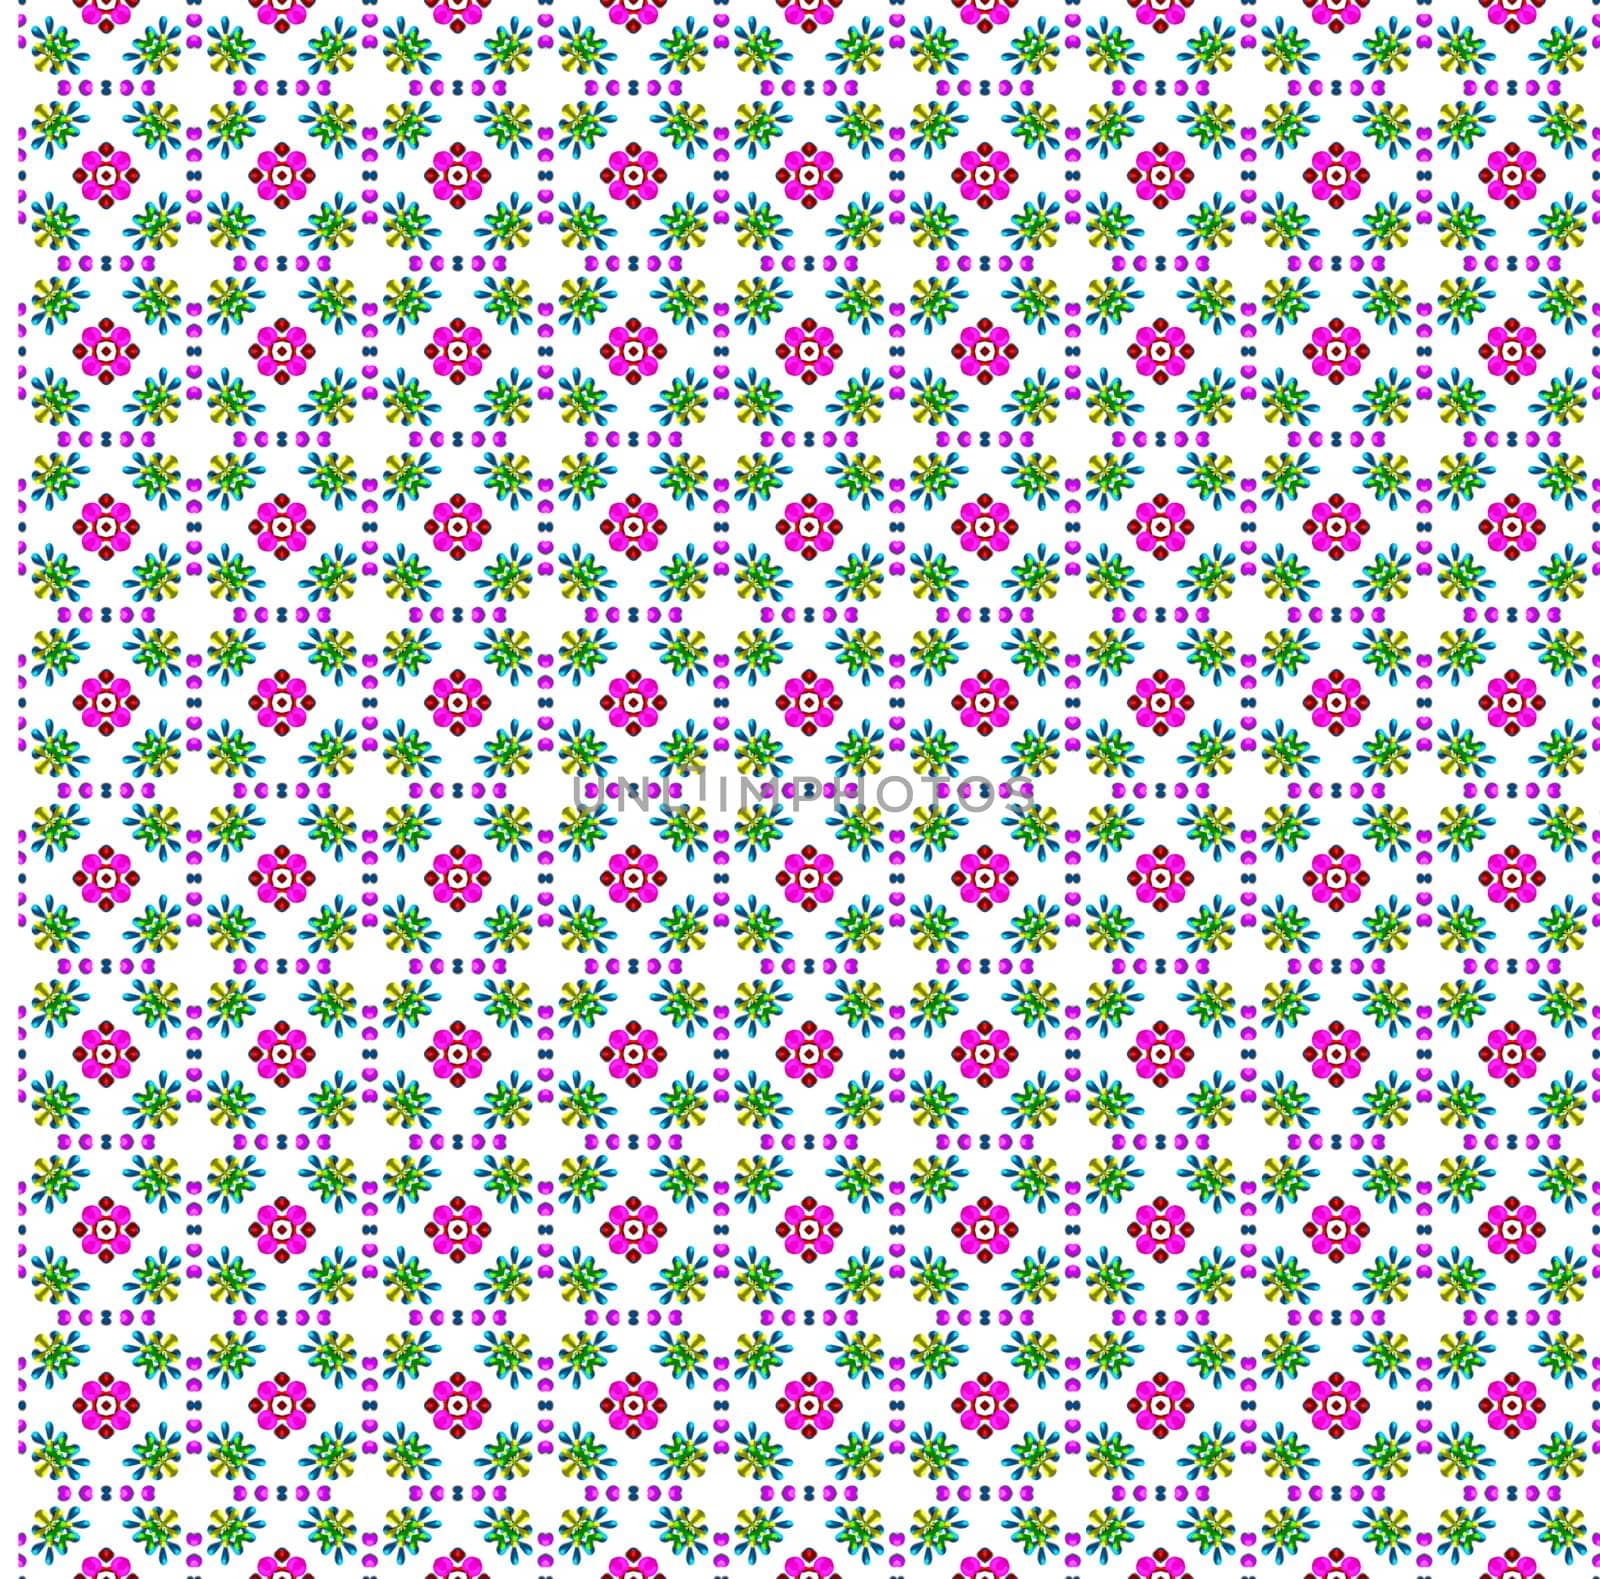 texture of repeating pink flower shapes on white